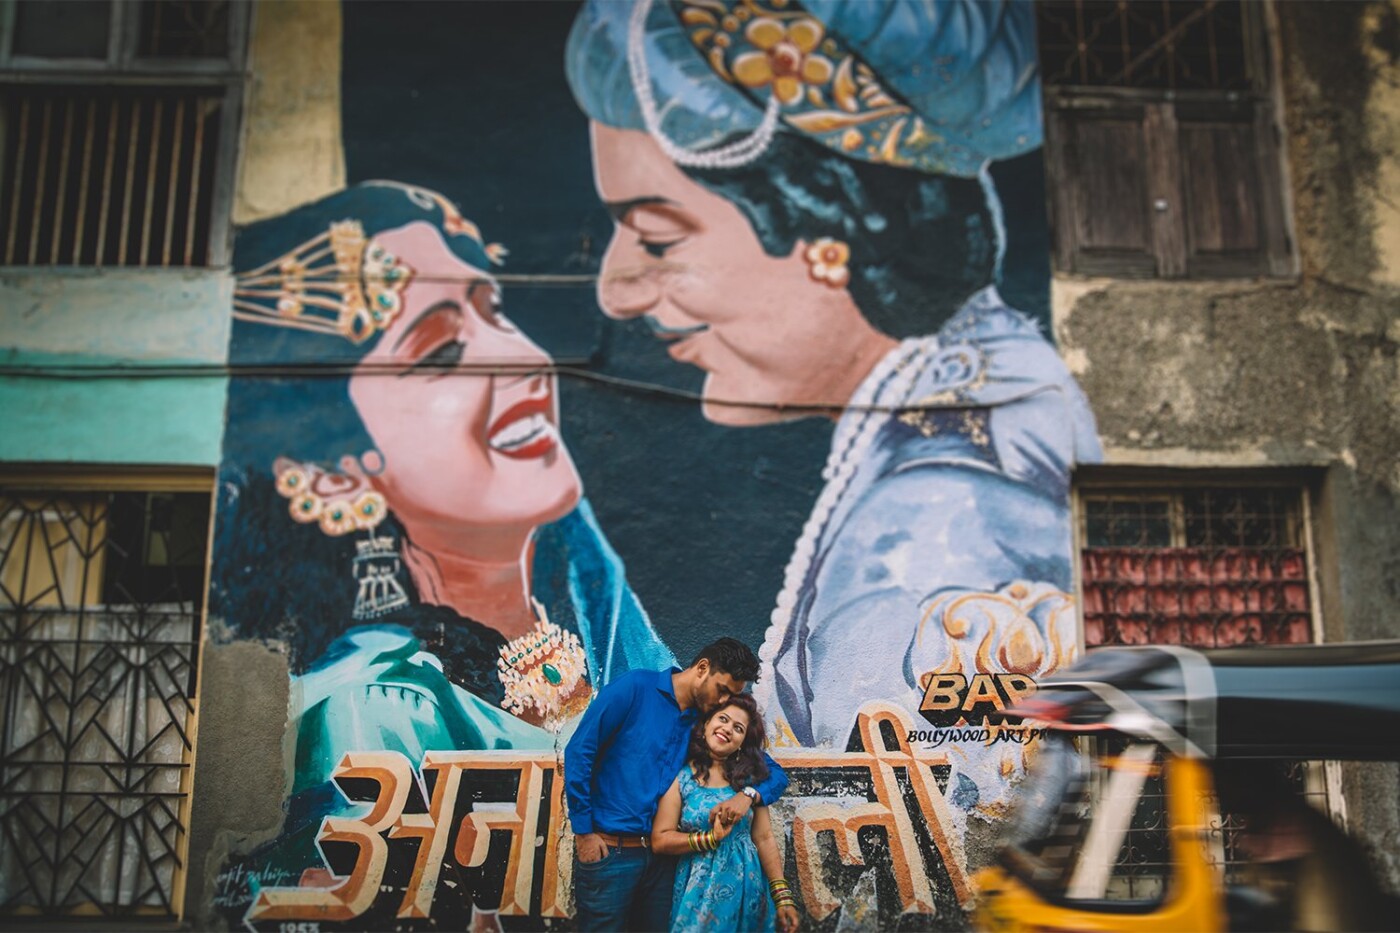 Bombay is a place where love for Bollywood thrives within its people, in the streets, in its art and in its music. Walking down the narrow lanes of Bandra, is like walking in a film itself - filled with wall art created by people from all over India and the World. This picture, perfectly fuses the romantic and lively love of this couple like you'd see in a Bollywood film. You just know when you see them together, their love is fun and quirky, filmy and energetic. 